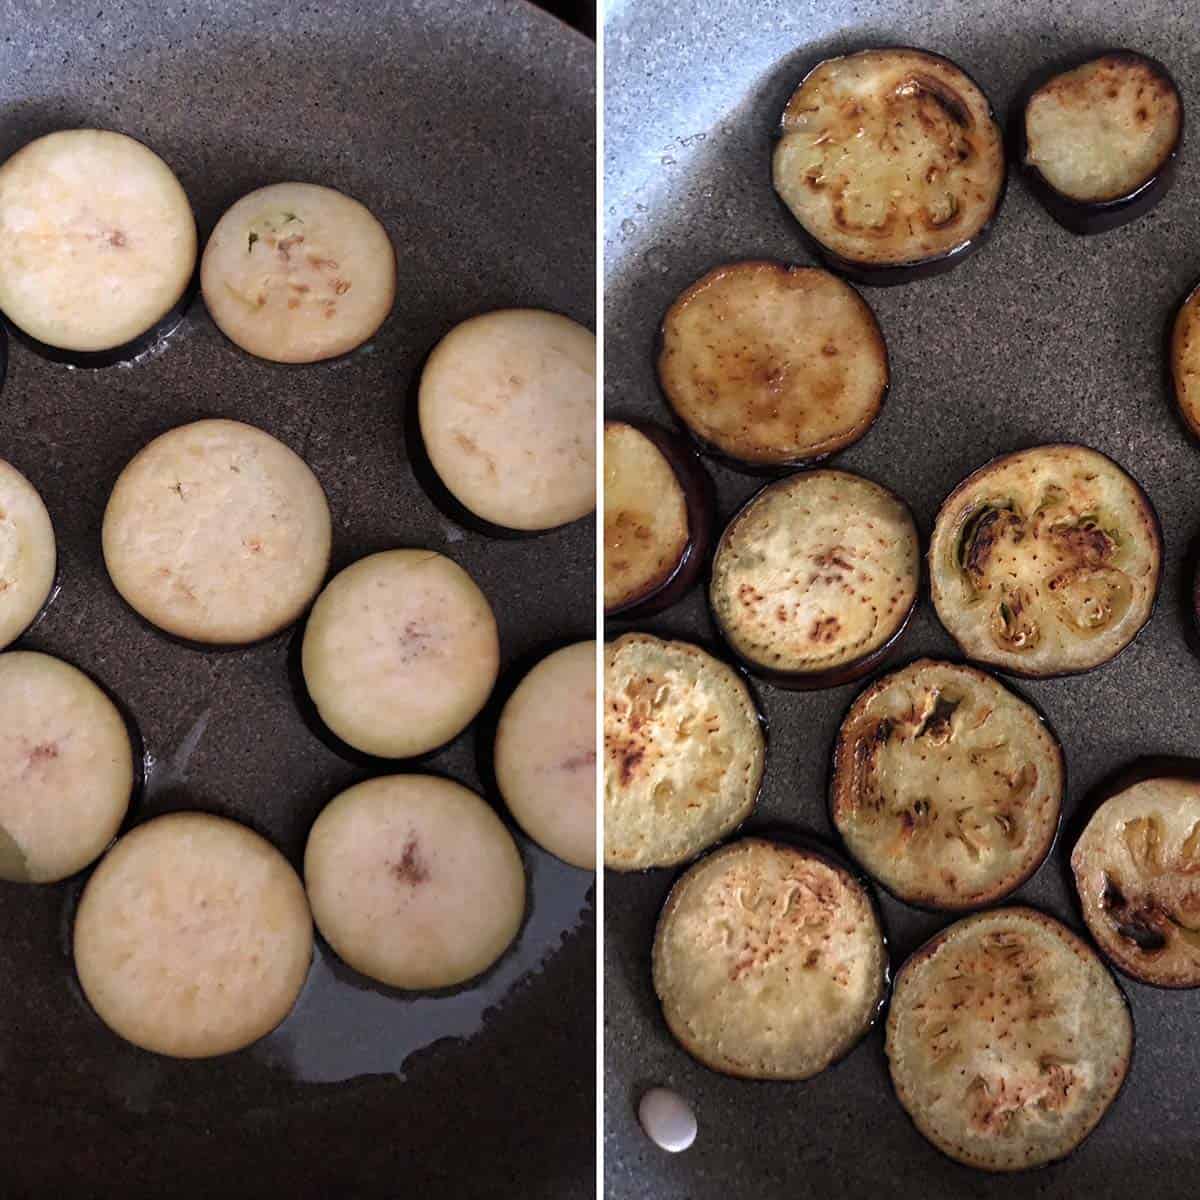 2 panel photo showing cooking of eggplant slices on a nonstick pan.